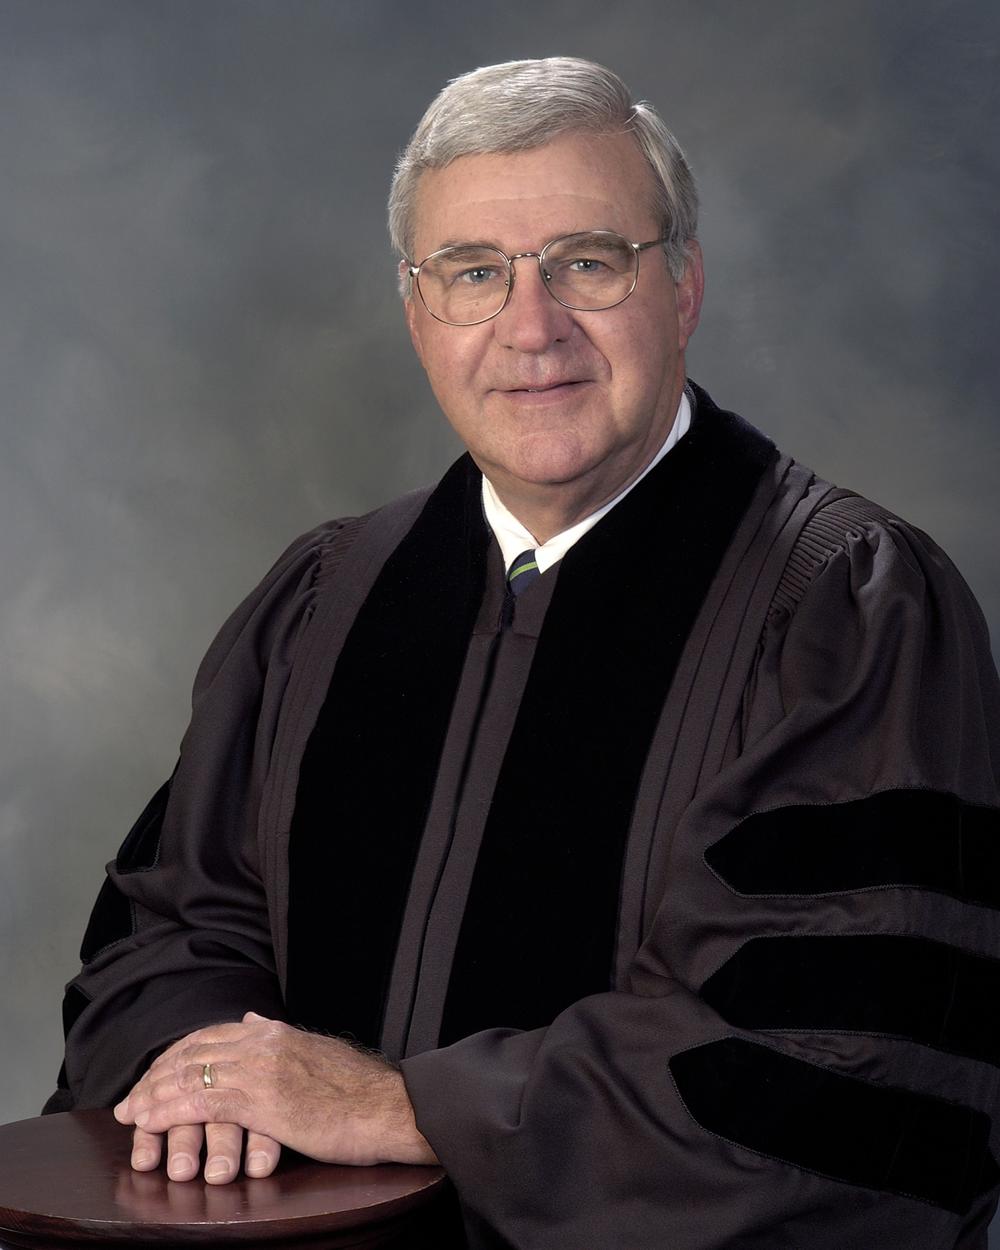 Justice Harris Hines has been elected as the new Chief Justice of the Supreme Court of Georgia.